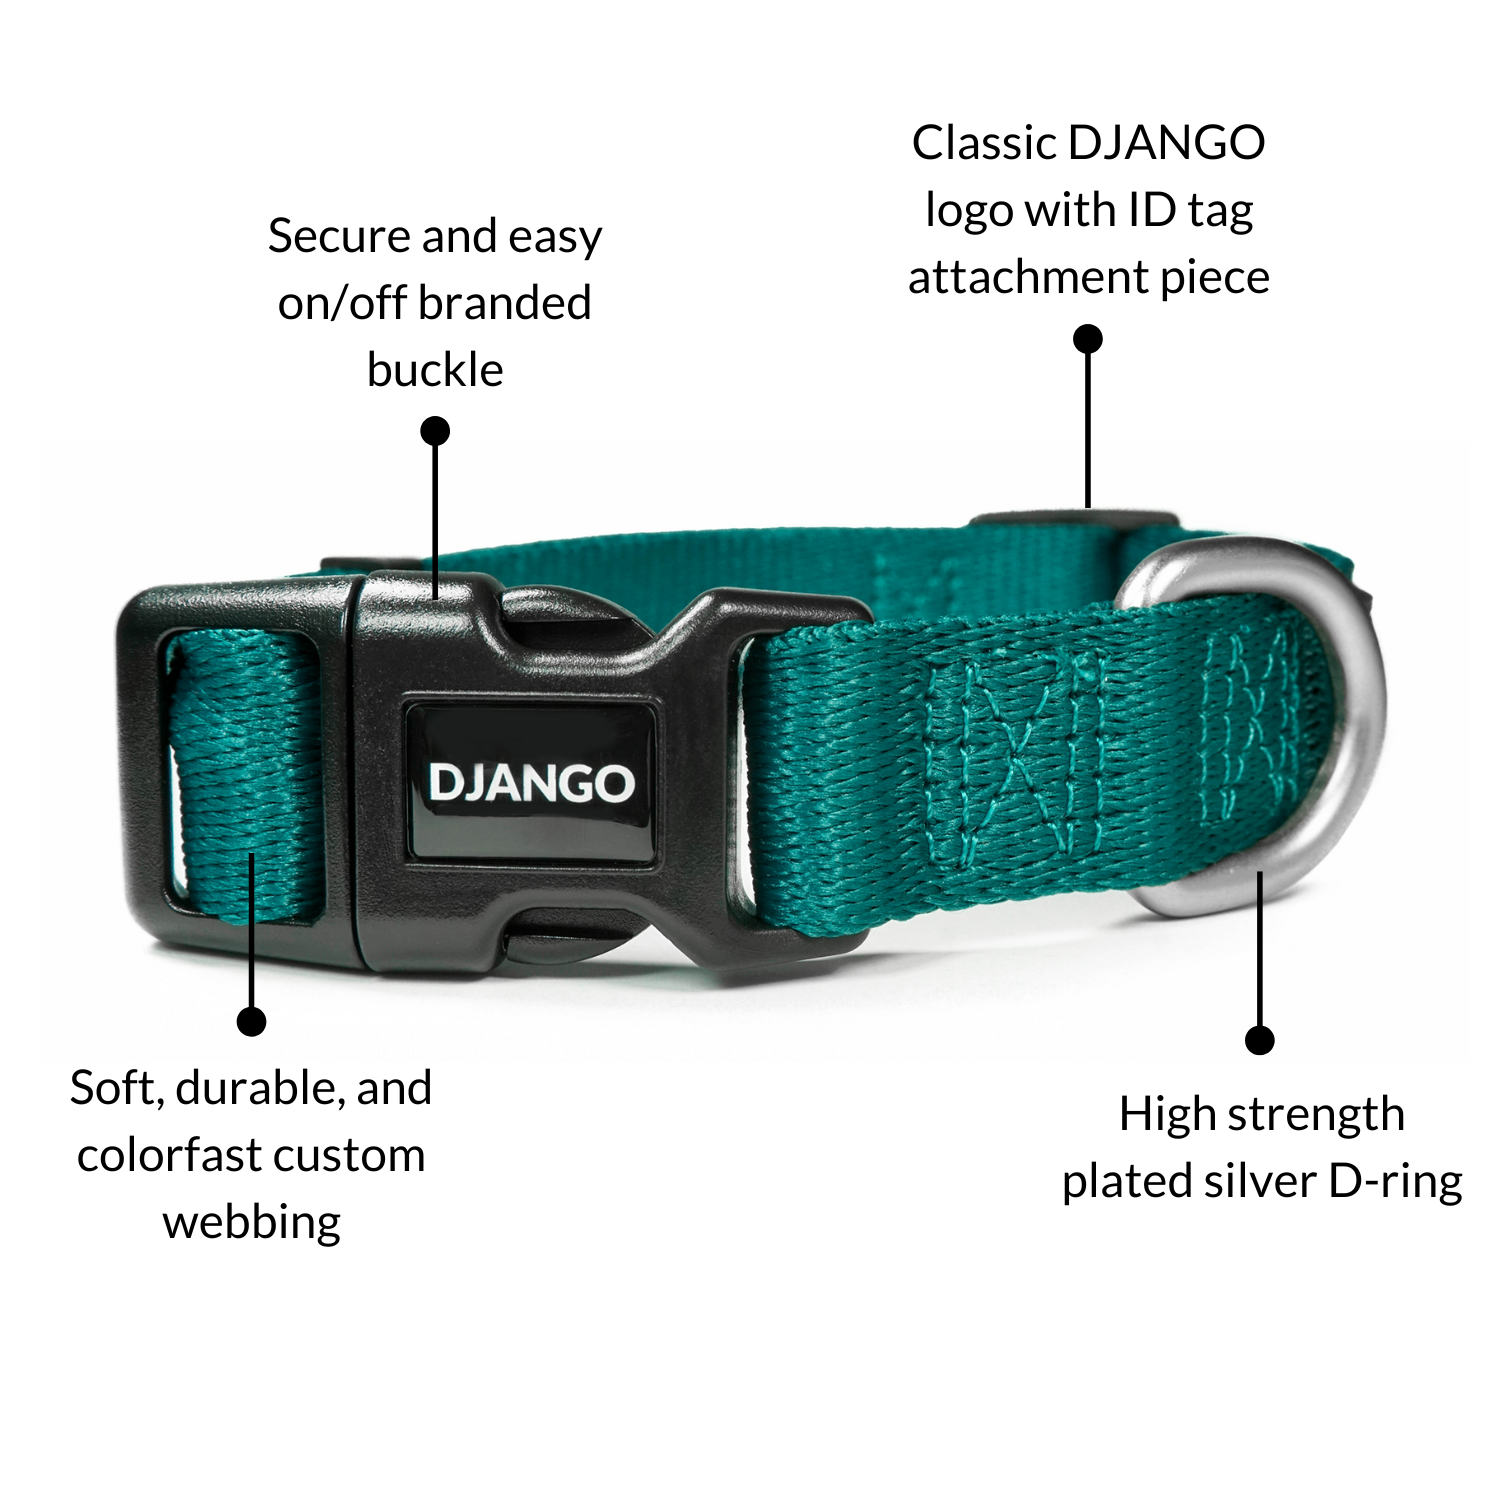 DJANGO Tahoe Dog Collar in Dark Teal - Key features include soft and durable custom webbing, a heavy duty plated silver D-ring, a secure and easy on-off side release buckle, and DJANGO's classic logo. - djangobrand.com